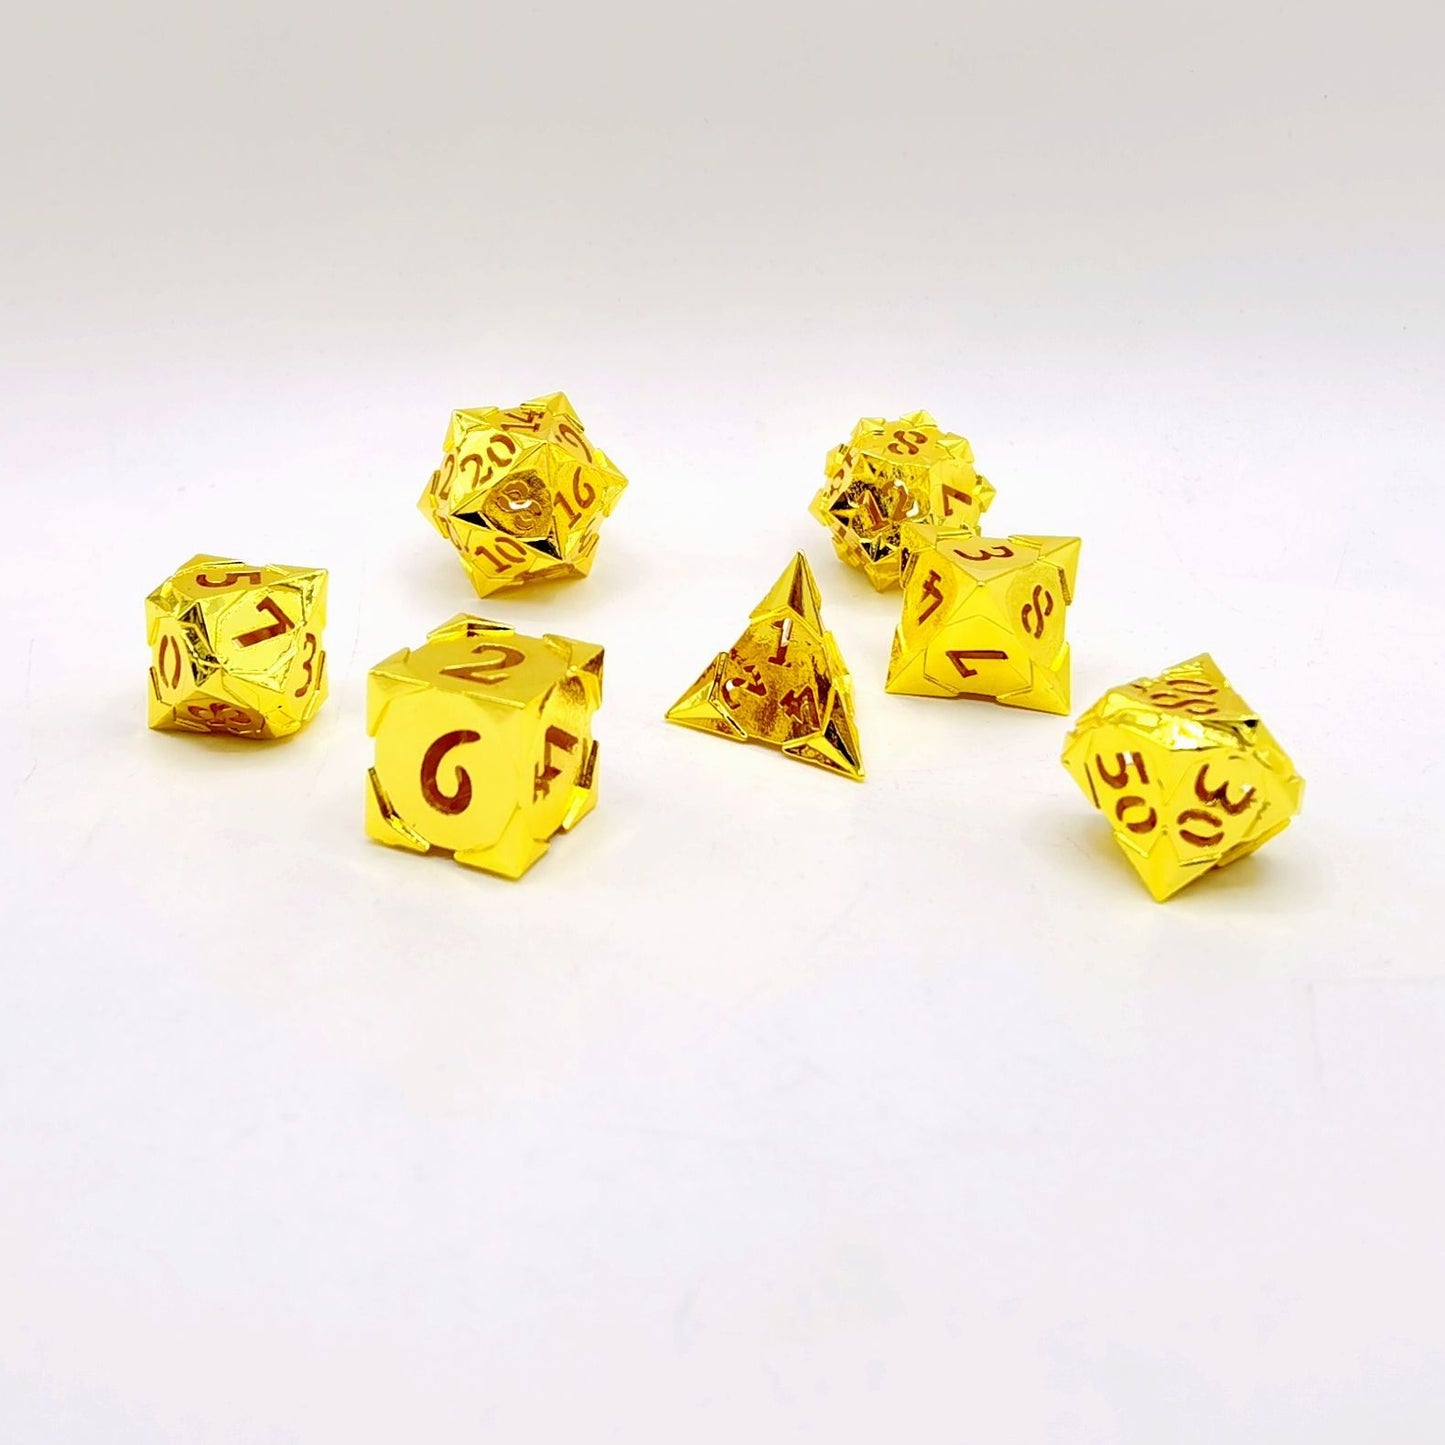 HYMGHO Morning Star Dice hollow out numbers shiny gold